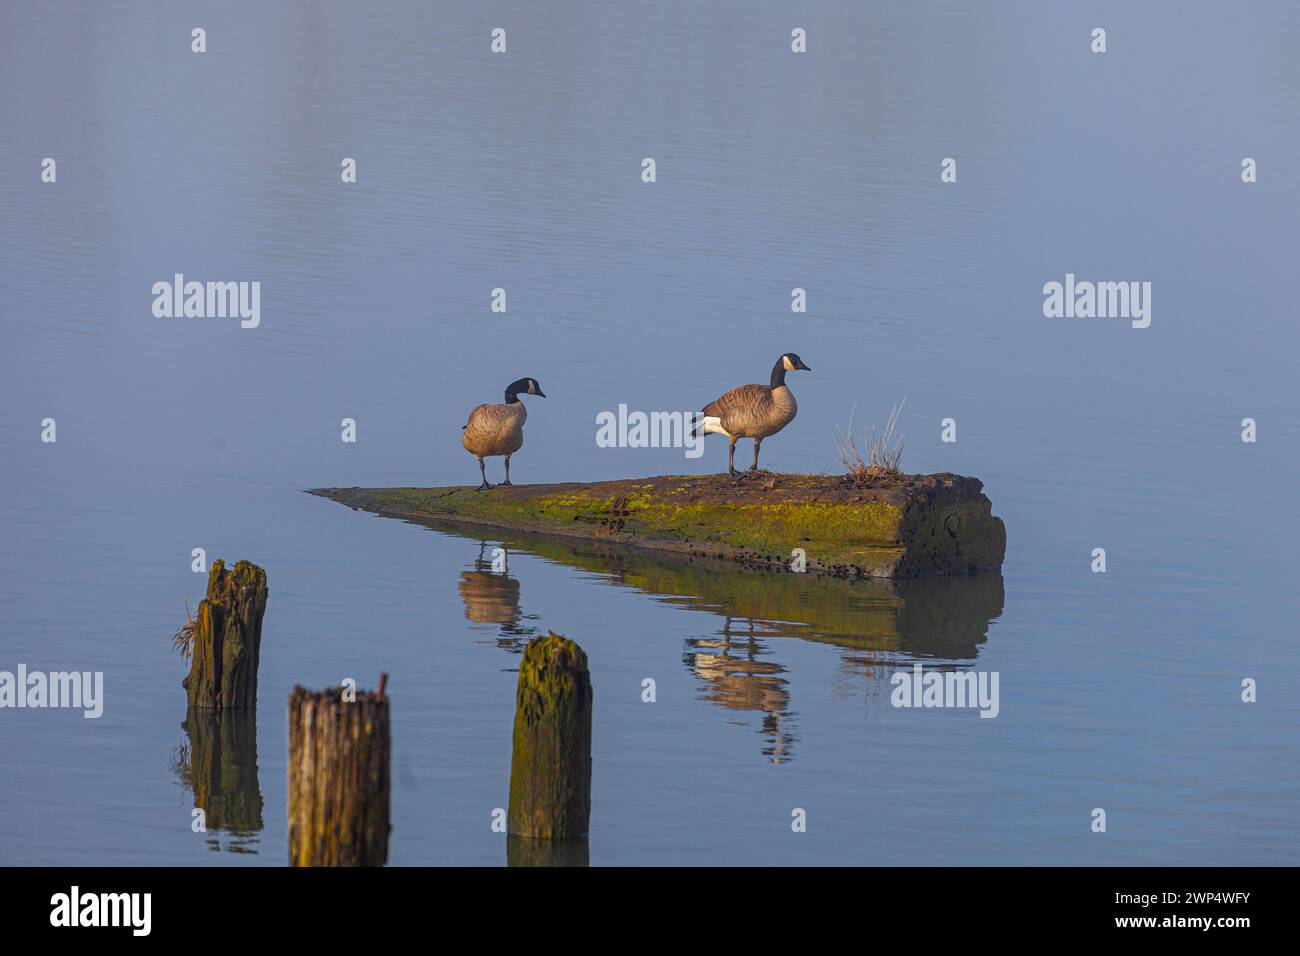 Pair of Canada Geese standing on a submerged log in Steveston Canada Stock Photo